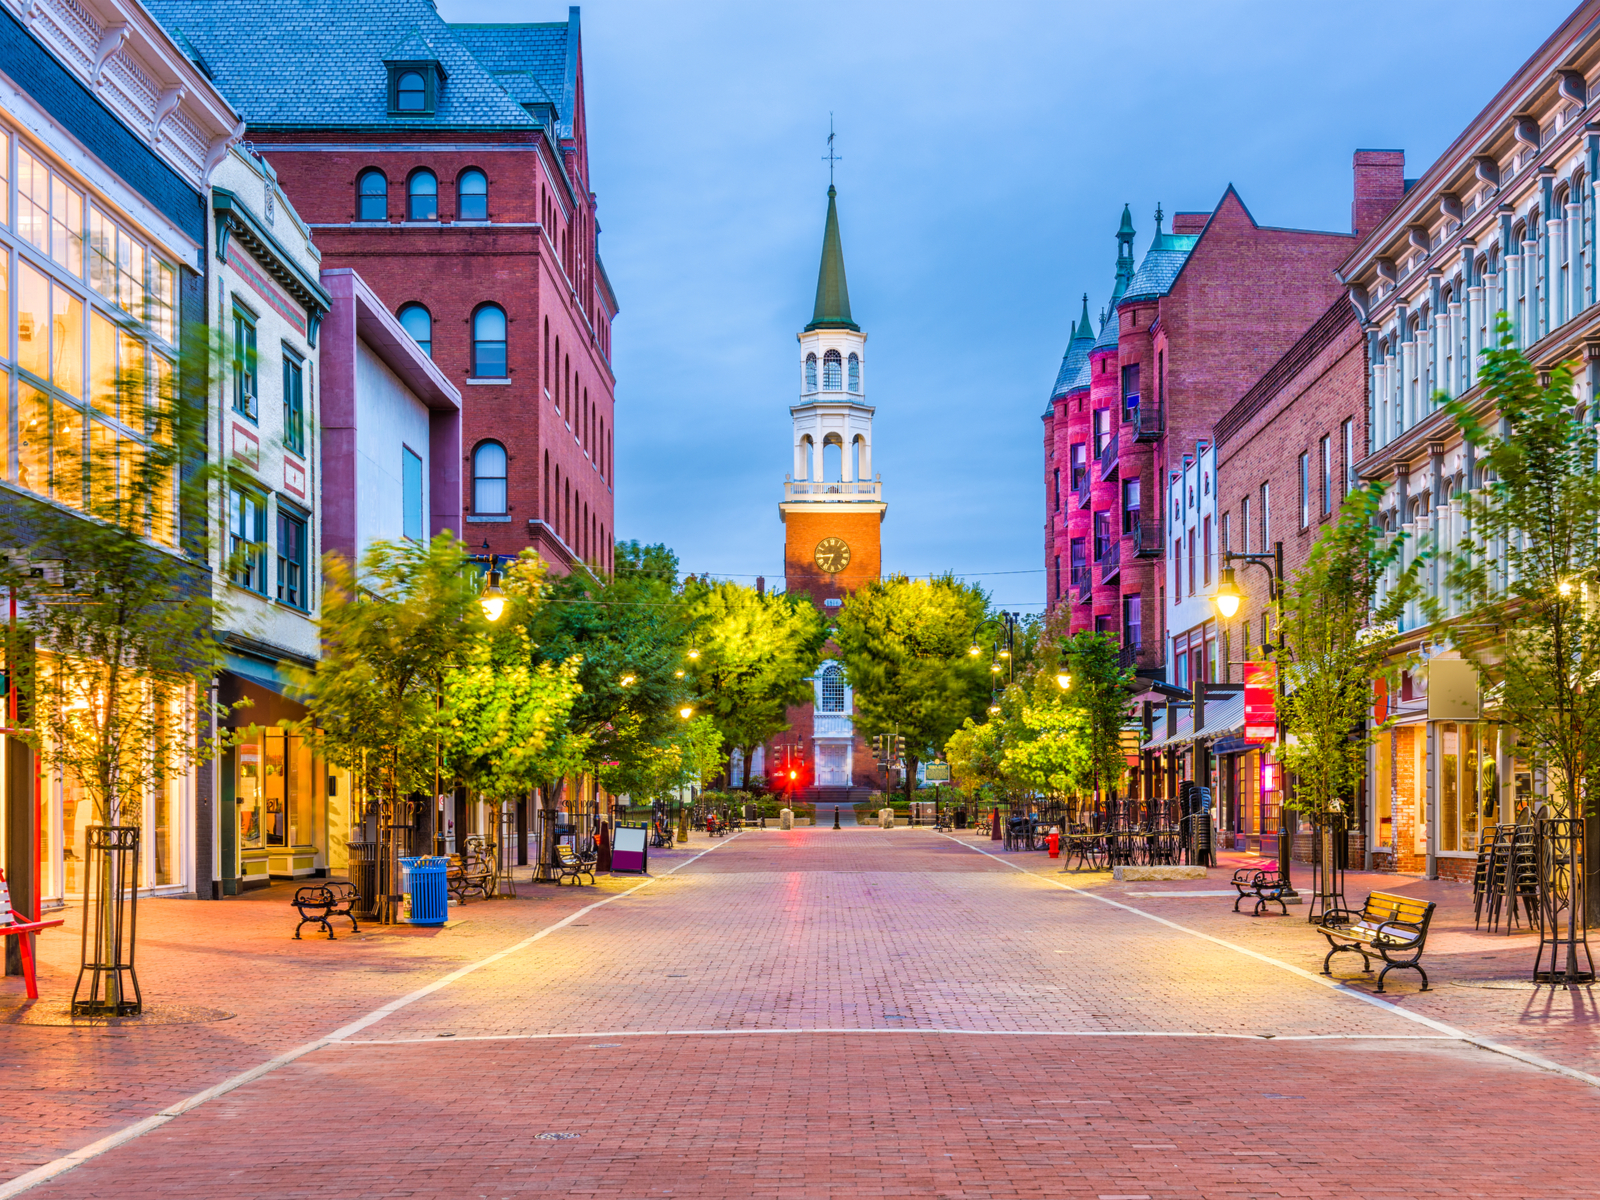 Church Street Marketplace in Spring pictured during the best time to visit Vermont